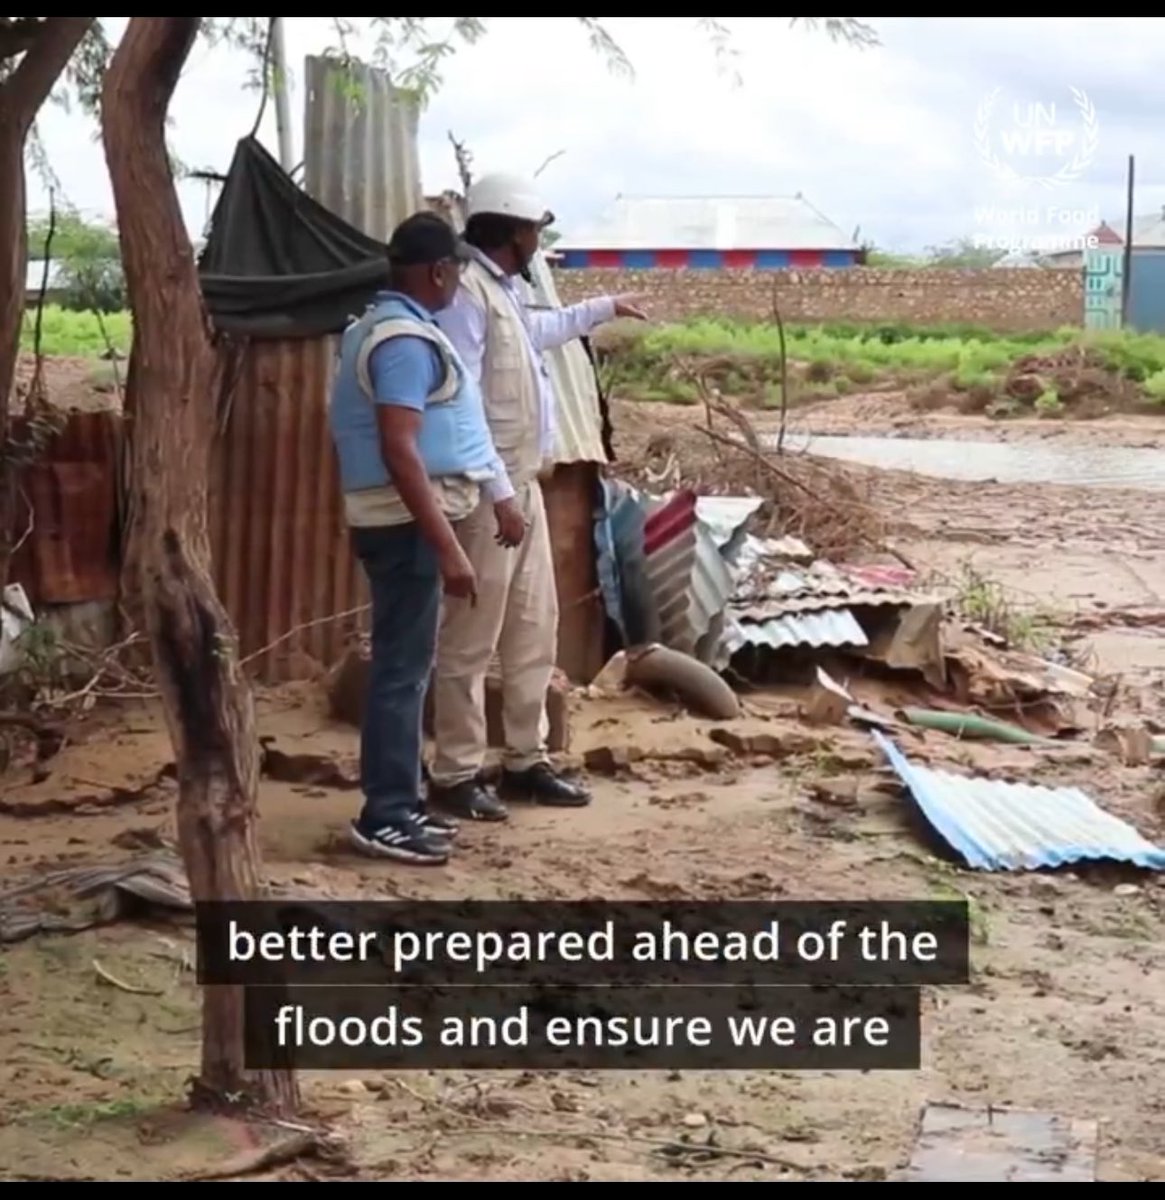 The National Disaster Management Agency @SoDMA_Somalia is carrying out early warning messaging to enable communities to prepare for floods in #Somalia with the support of #WFP.